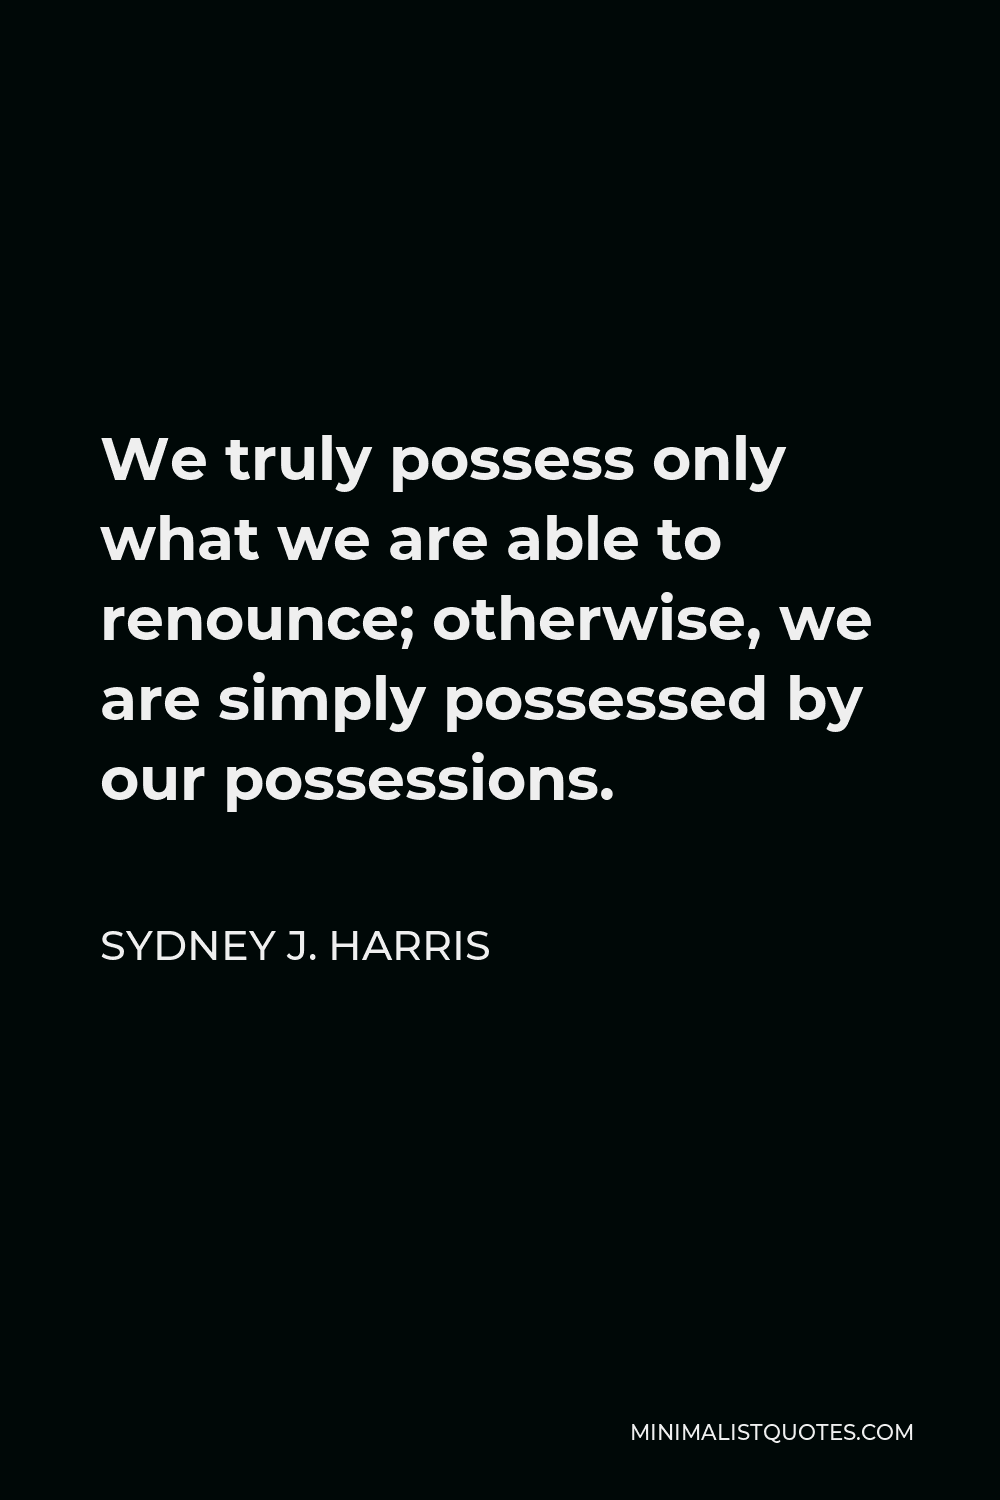 Sydney J. Harris Quote - We truly possess only what we are able to renounce; otherwise, we are simply possessed by our possessions.